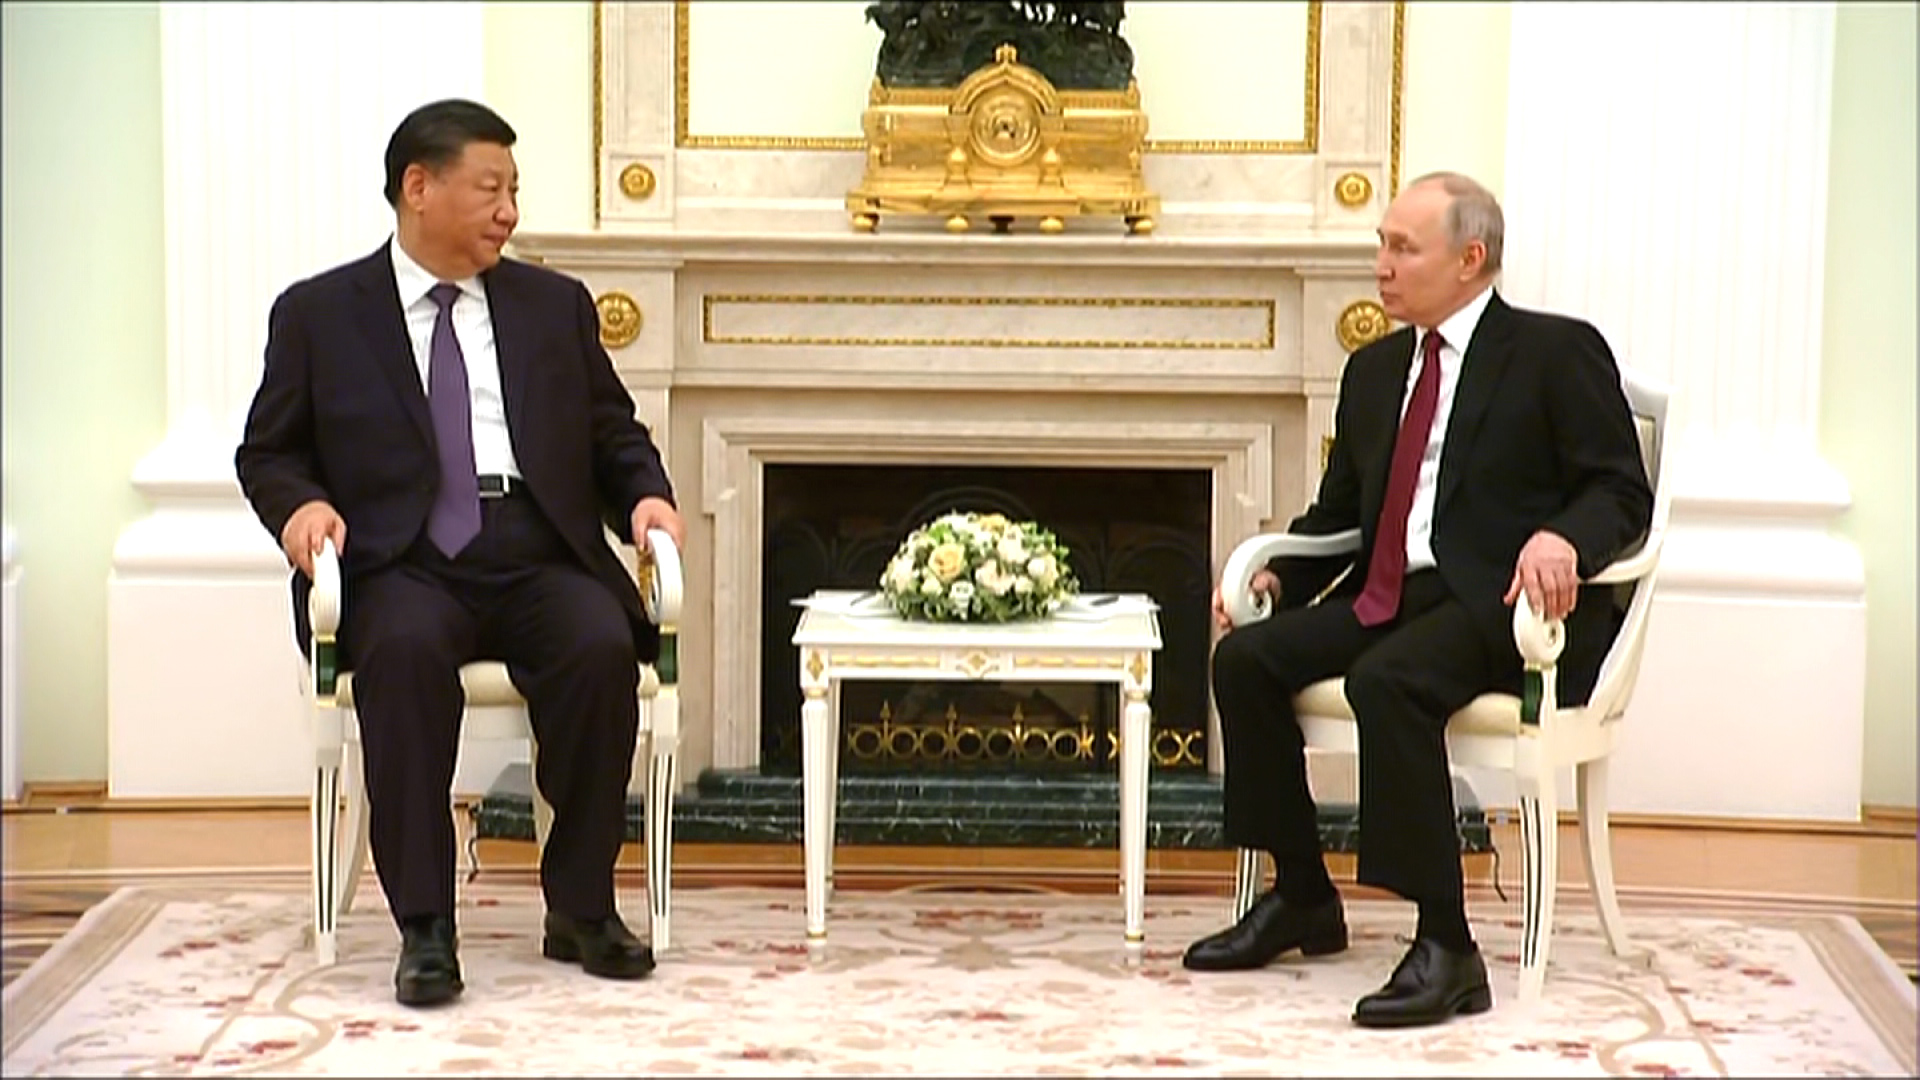 Russian President Vladimir Putin, right, welcomes Chinese President Xi Jinping to the Kremlin in Moscow, Russia, on March 20.